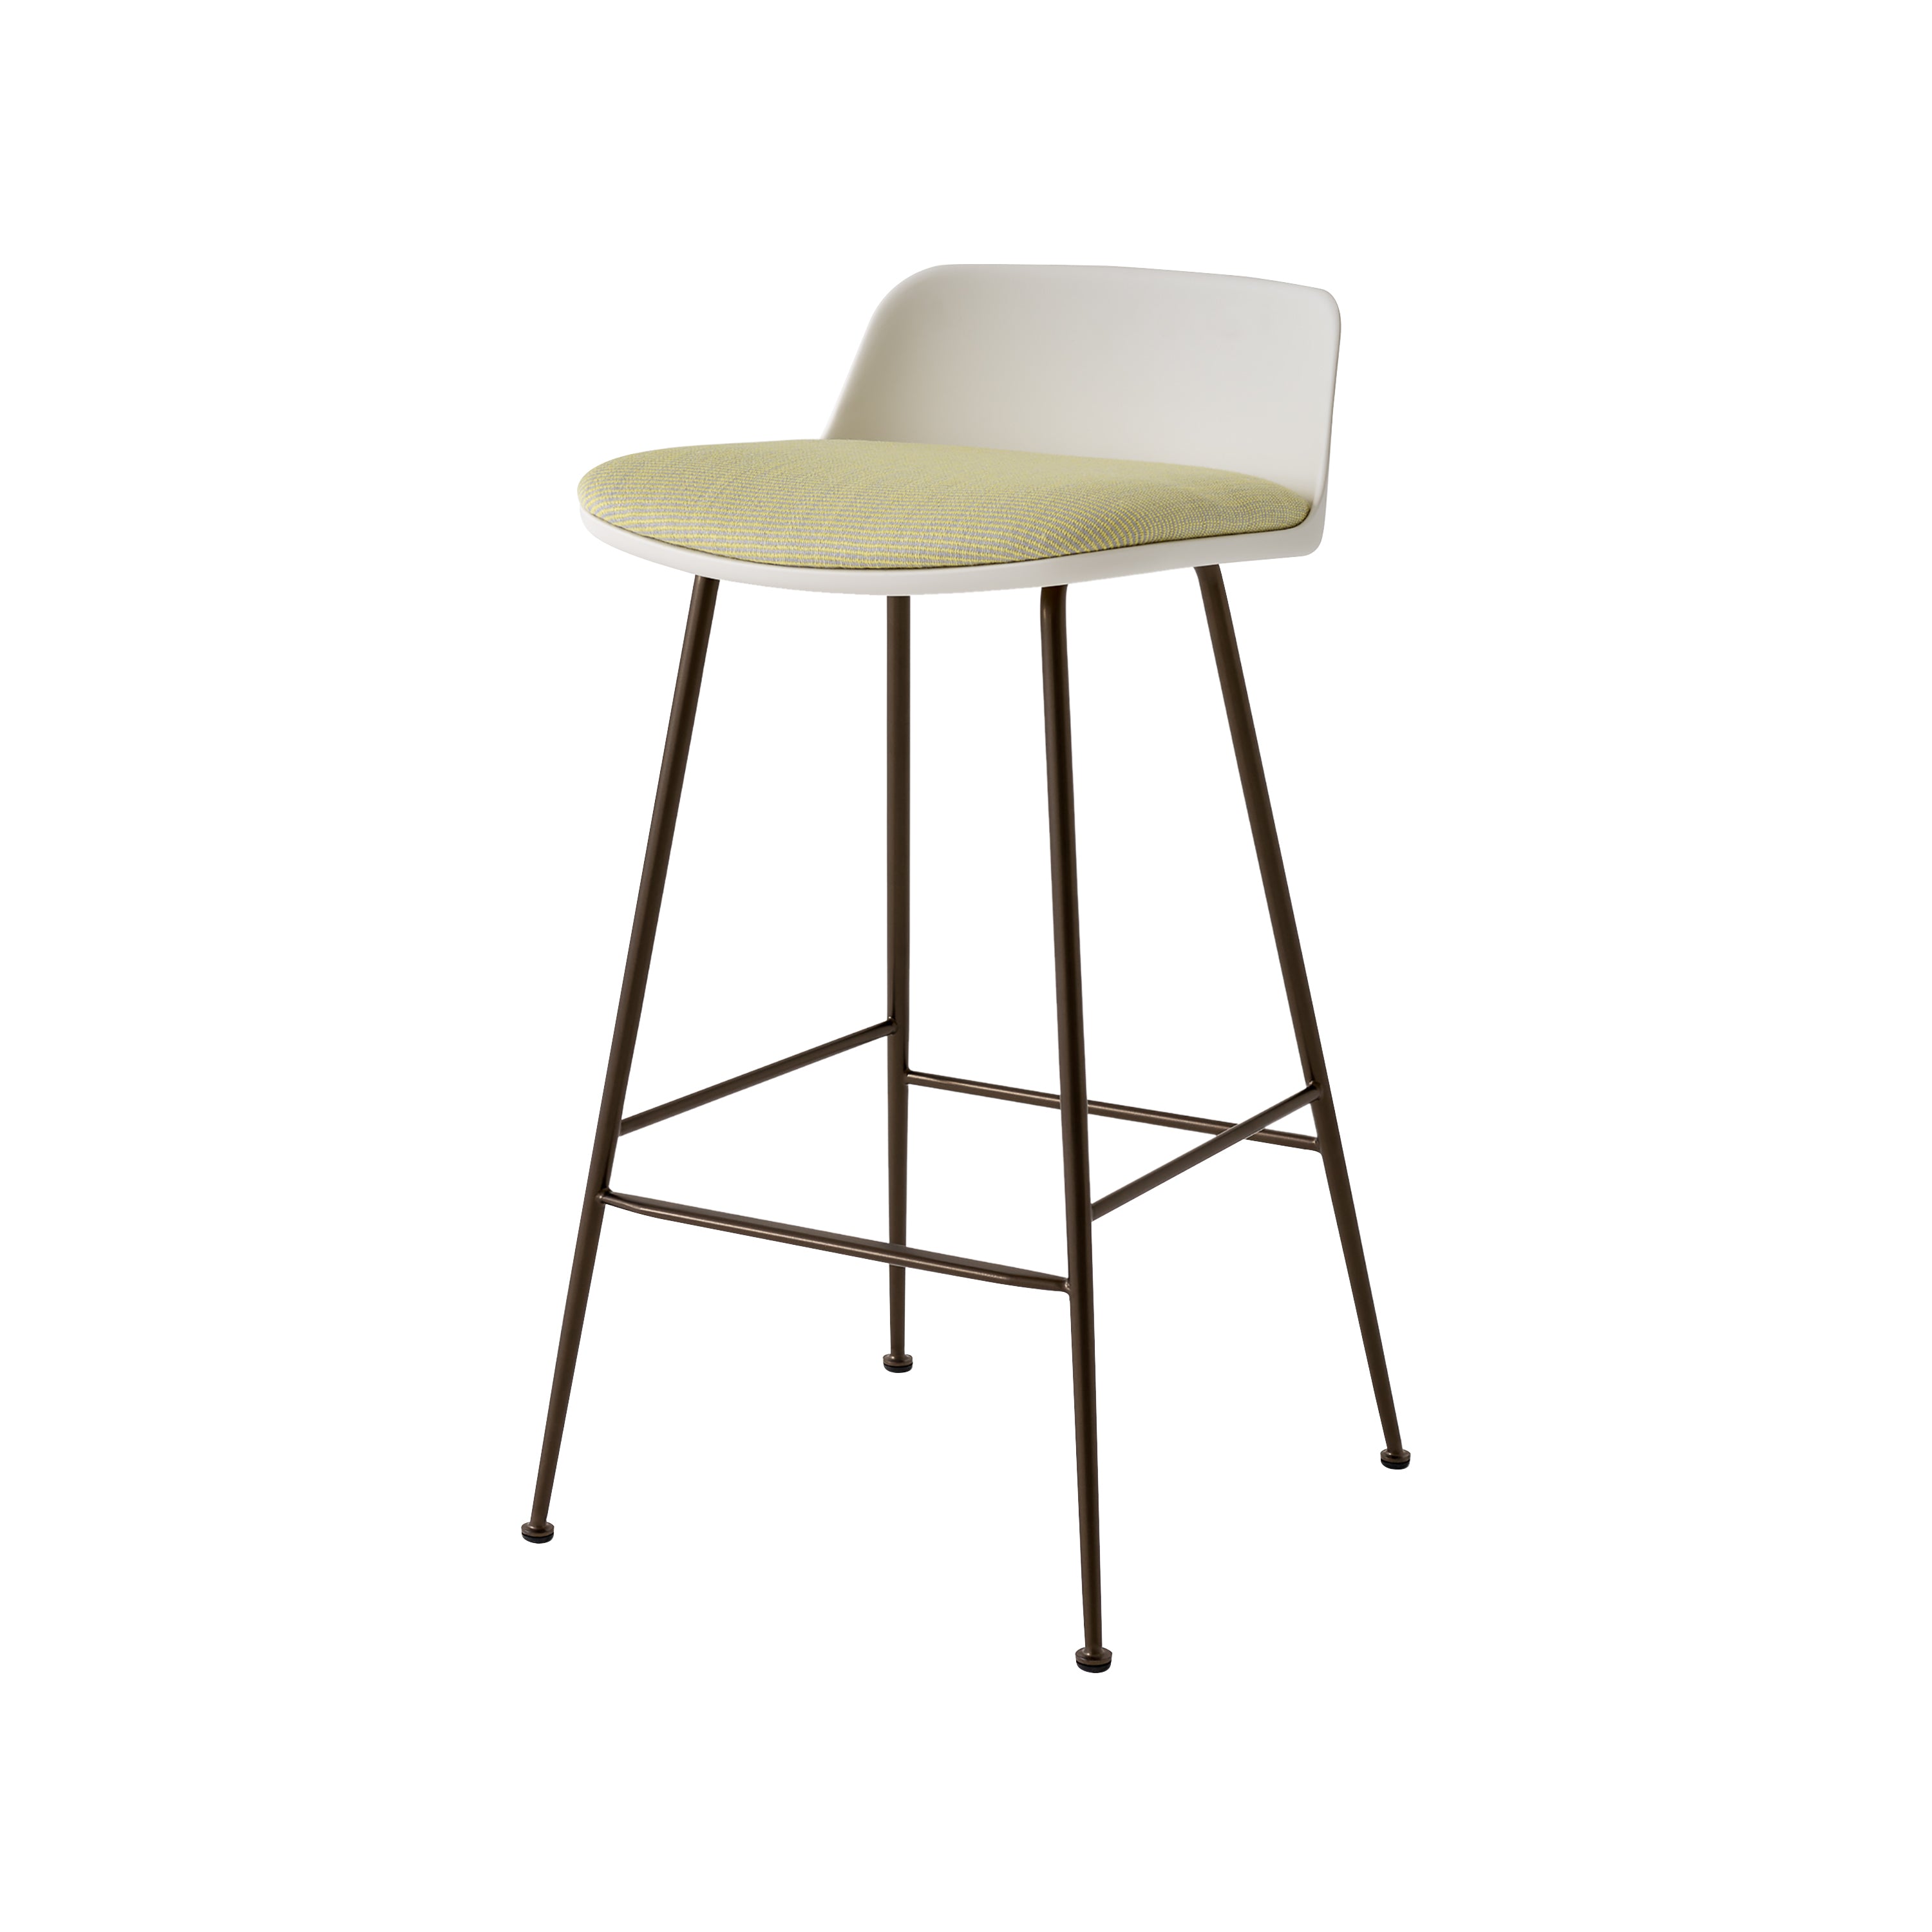 Rely Counter Stool: HW82 + White + Bronzed